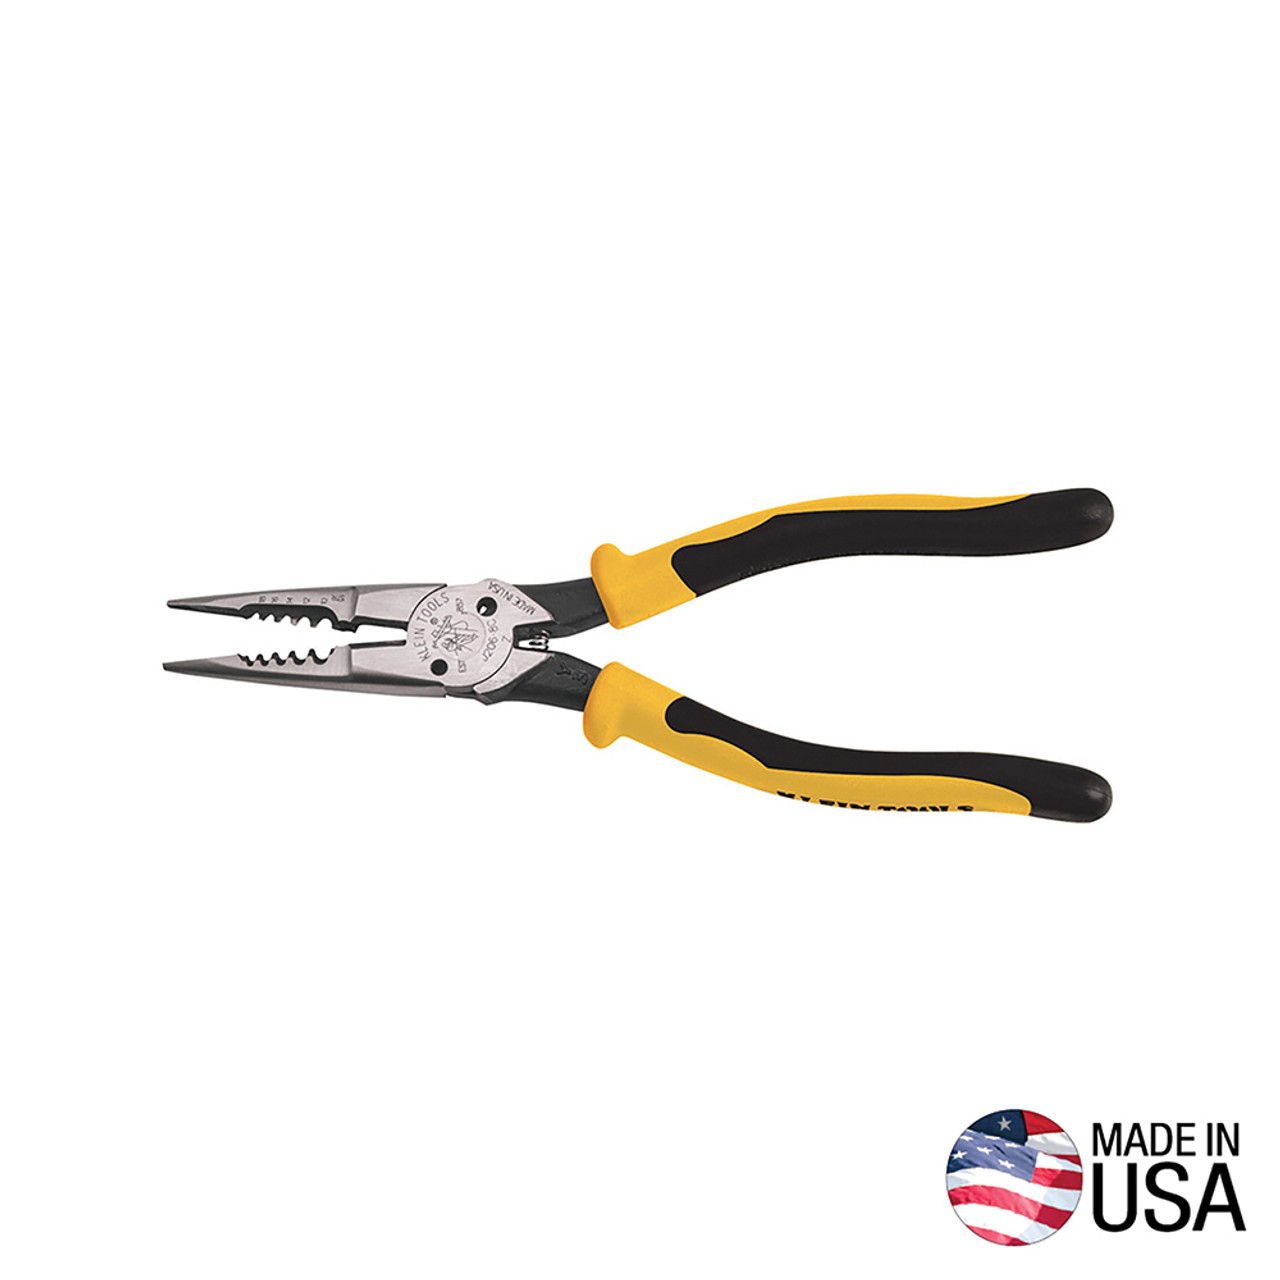 Pliers, All-Purpose Needle Nose, Spring Loaded, Cuts, Strips, 8.5-Inch